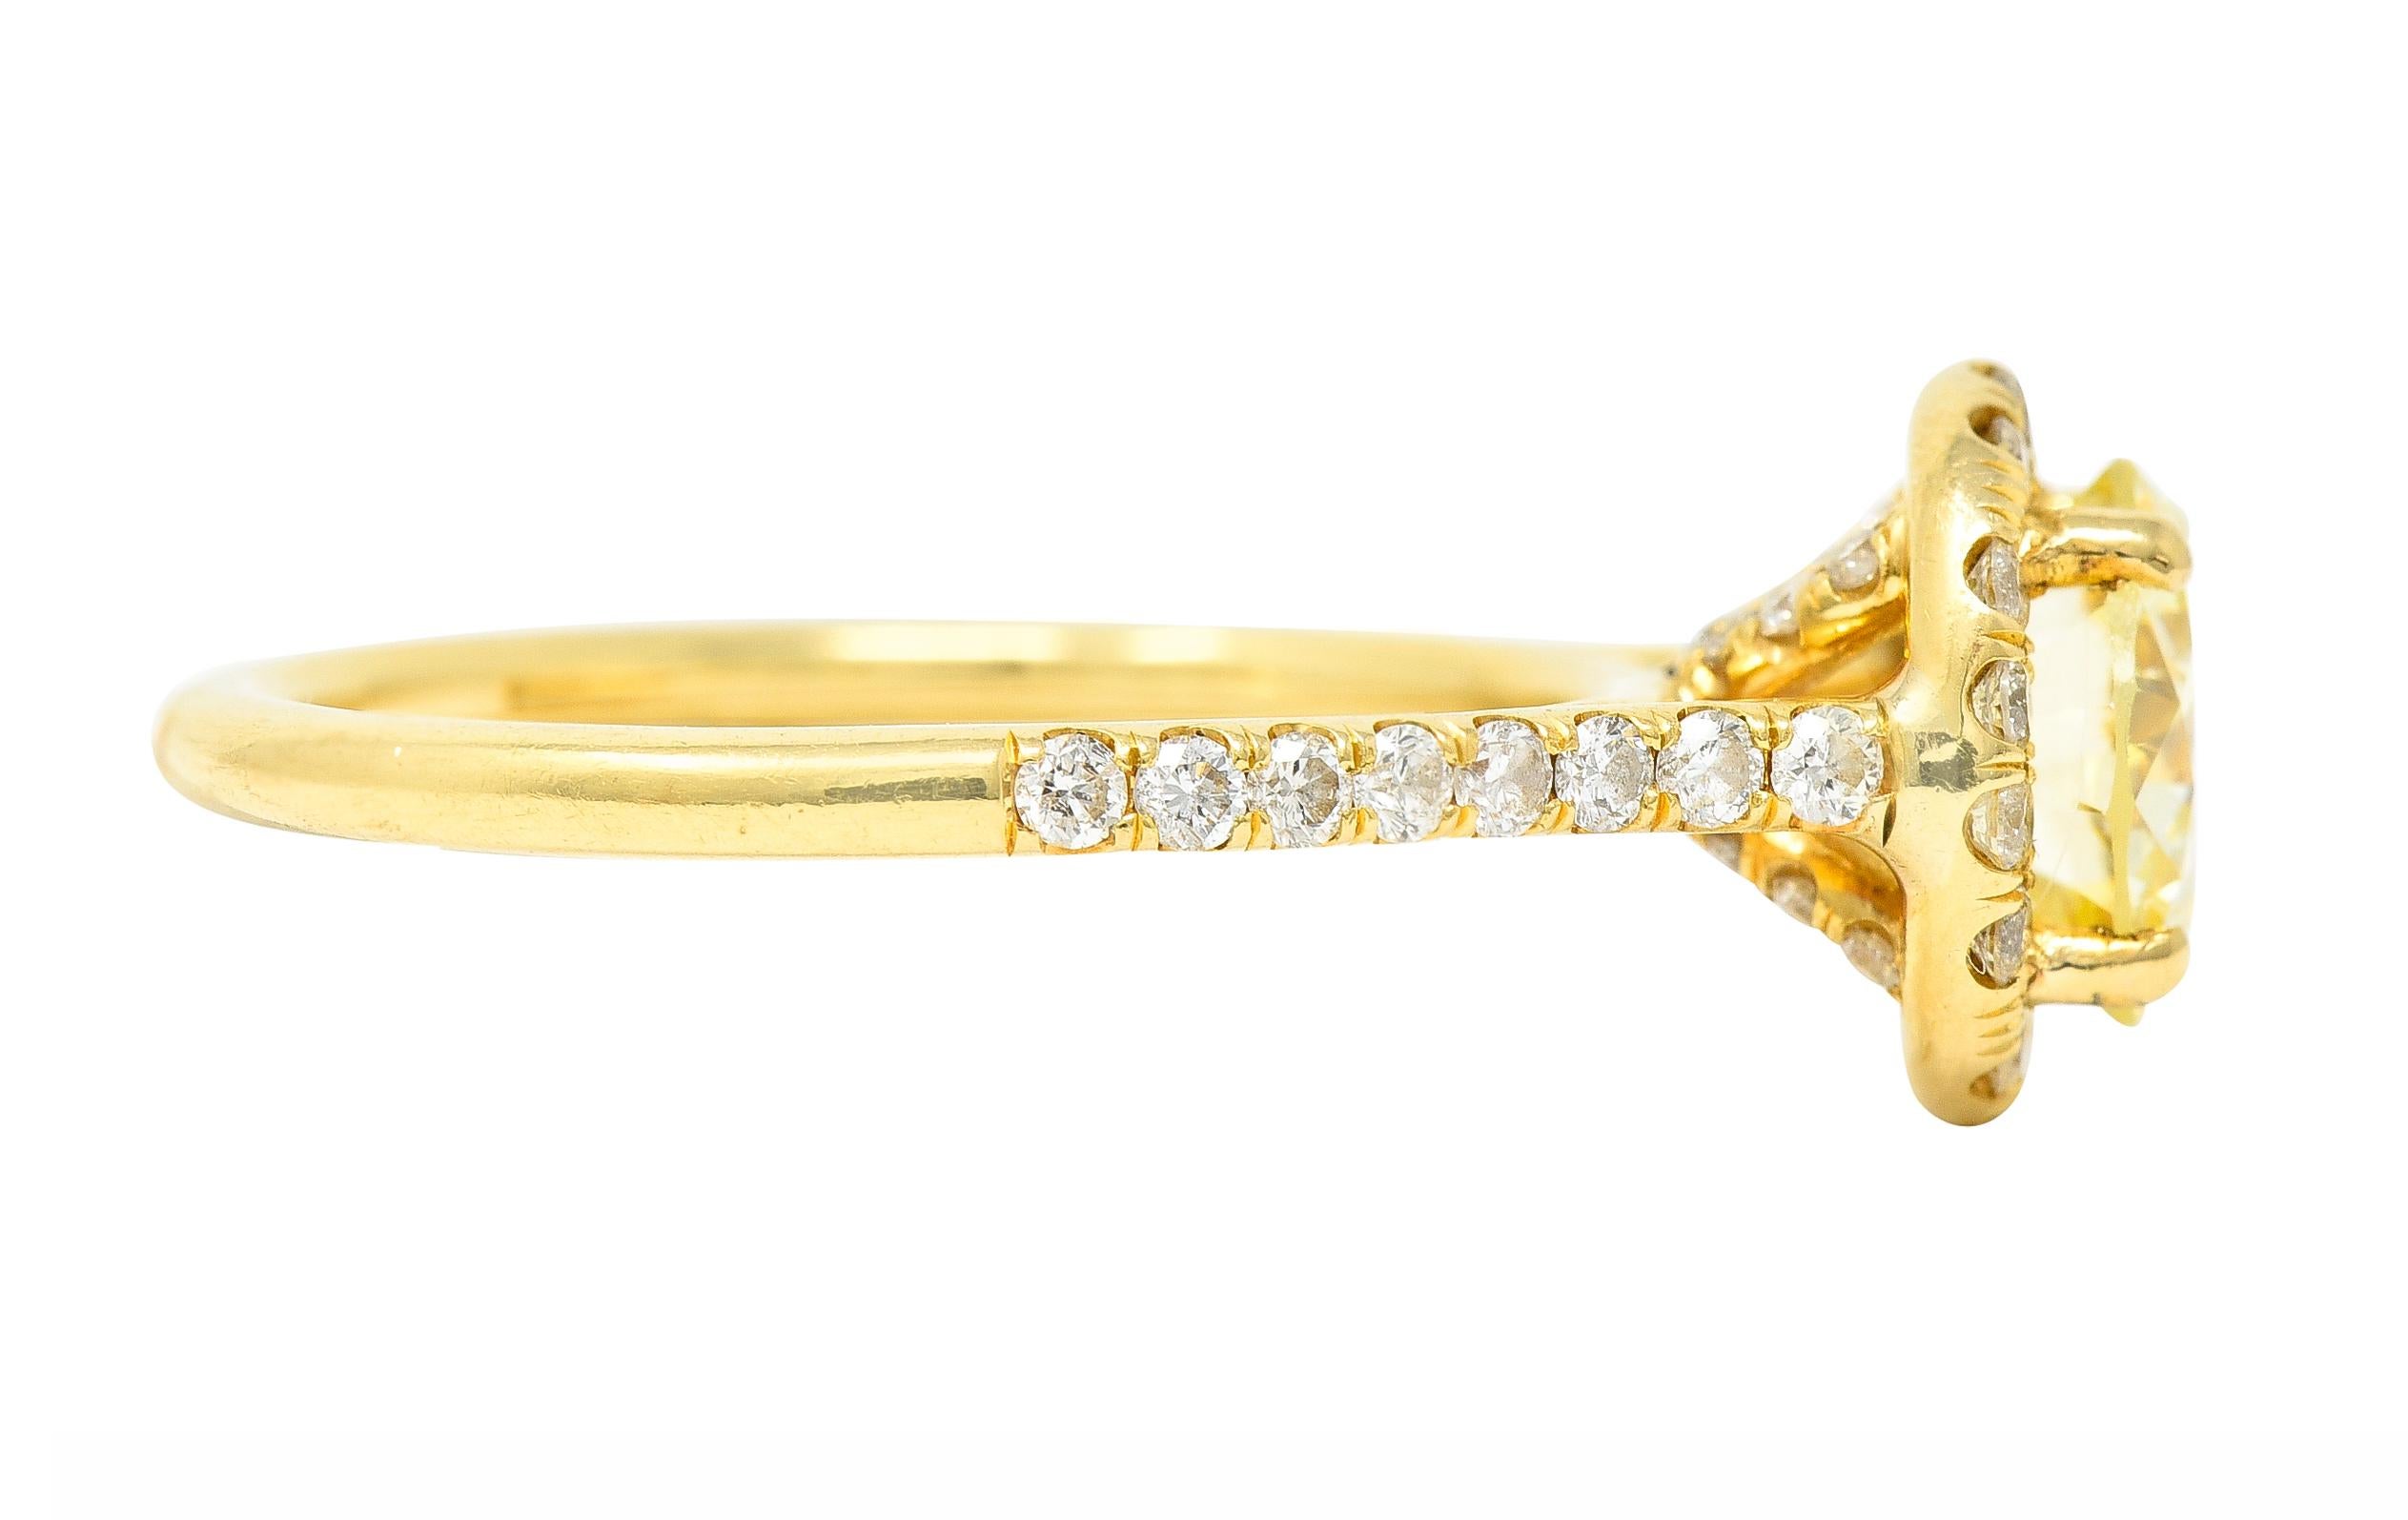 Contemporary 1.65 Carats Fancy Light Yellow Diamond 18 Karat Gold Halo Ring In Excellent Condition For Sale In Philadelphia, PA